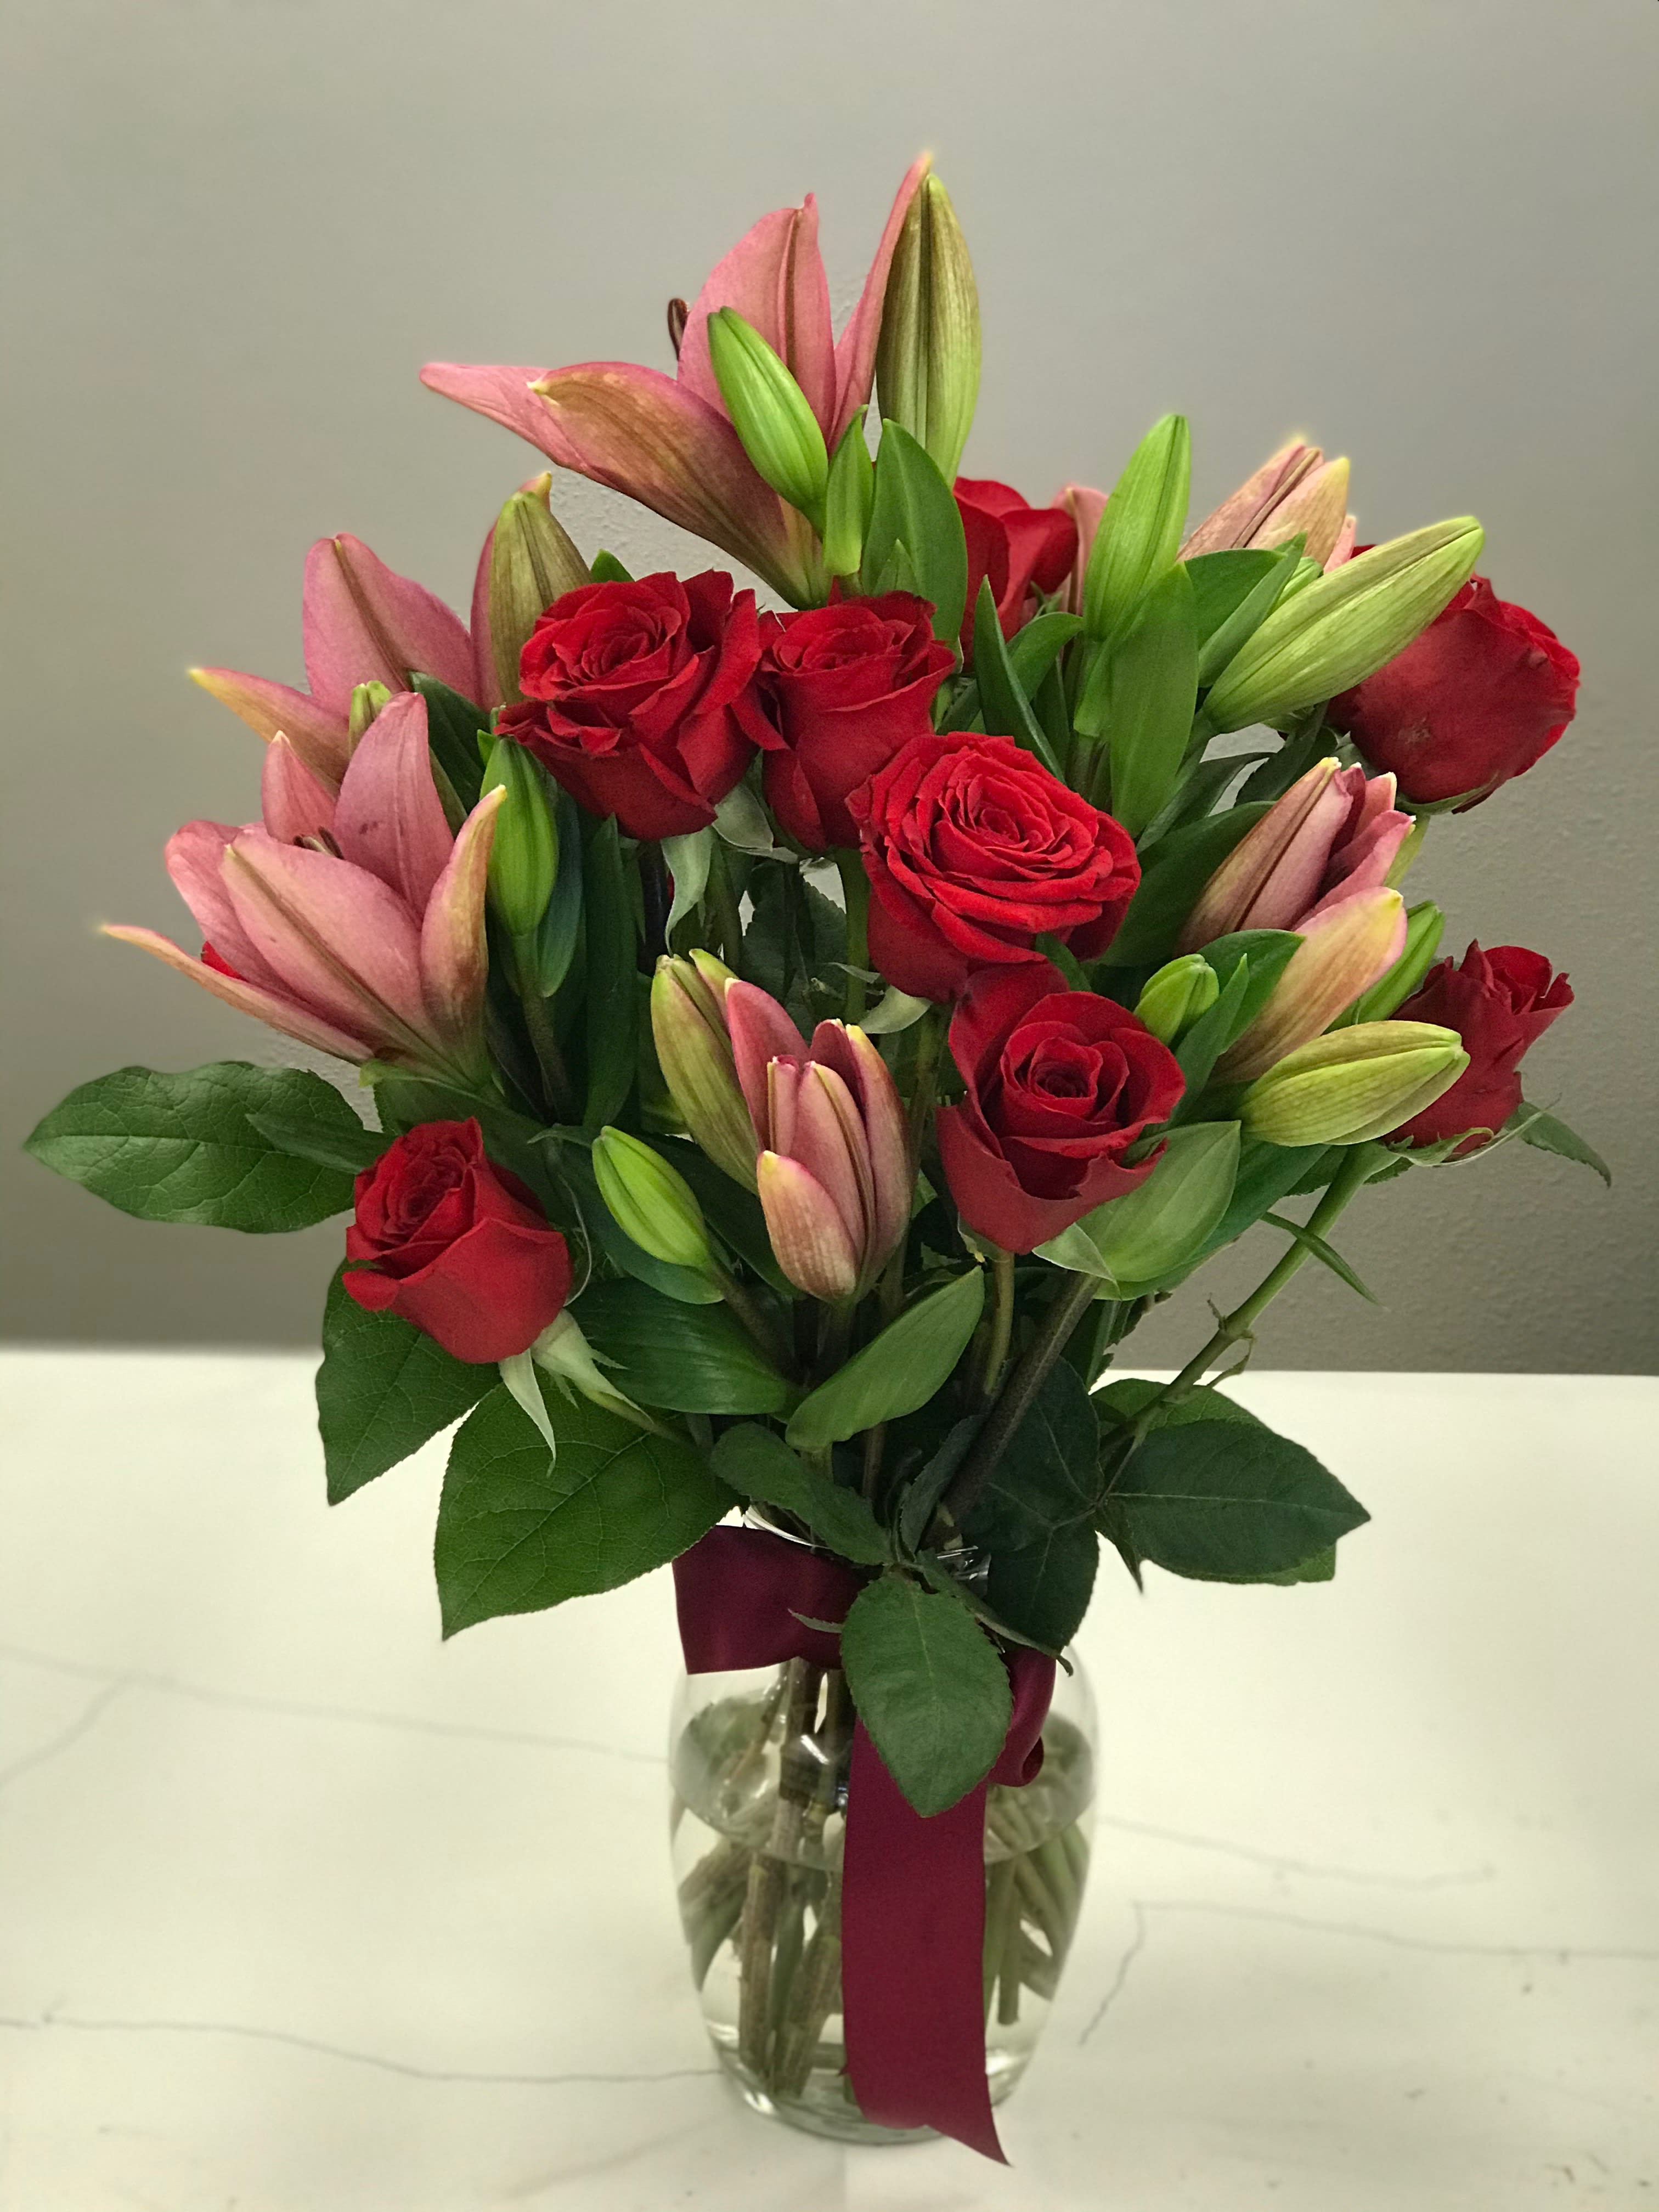 Roses and Lilies - A bouquet of Red roses and pink lilies is a classic and elegant way to I Love You. 